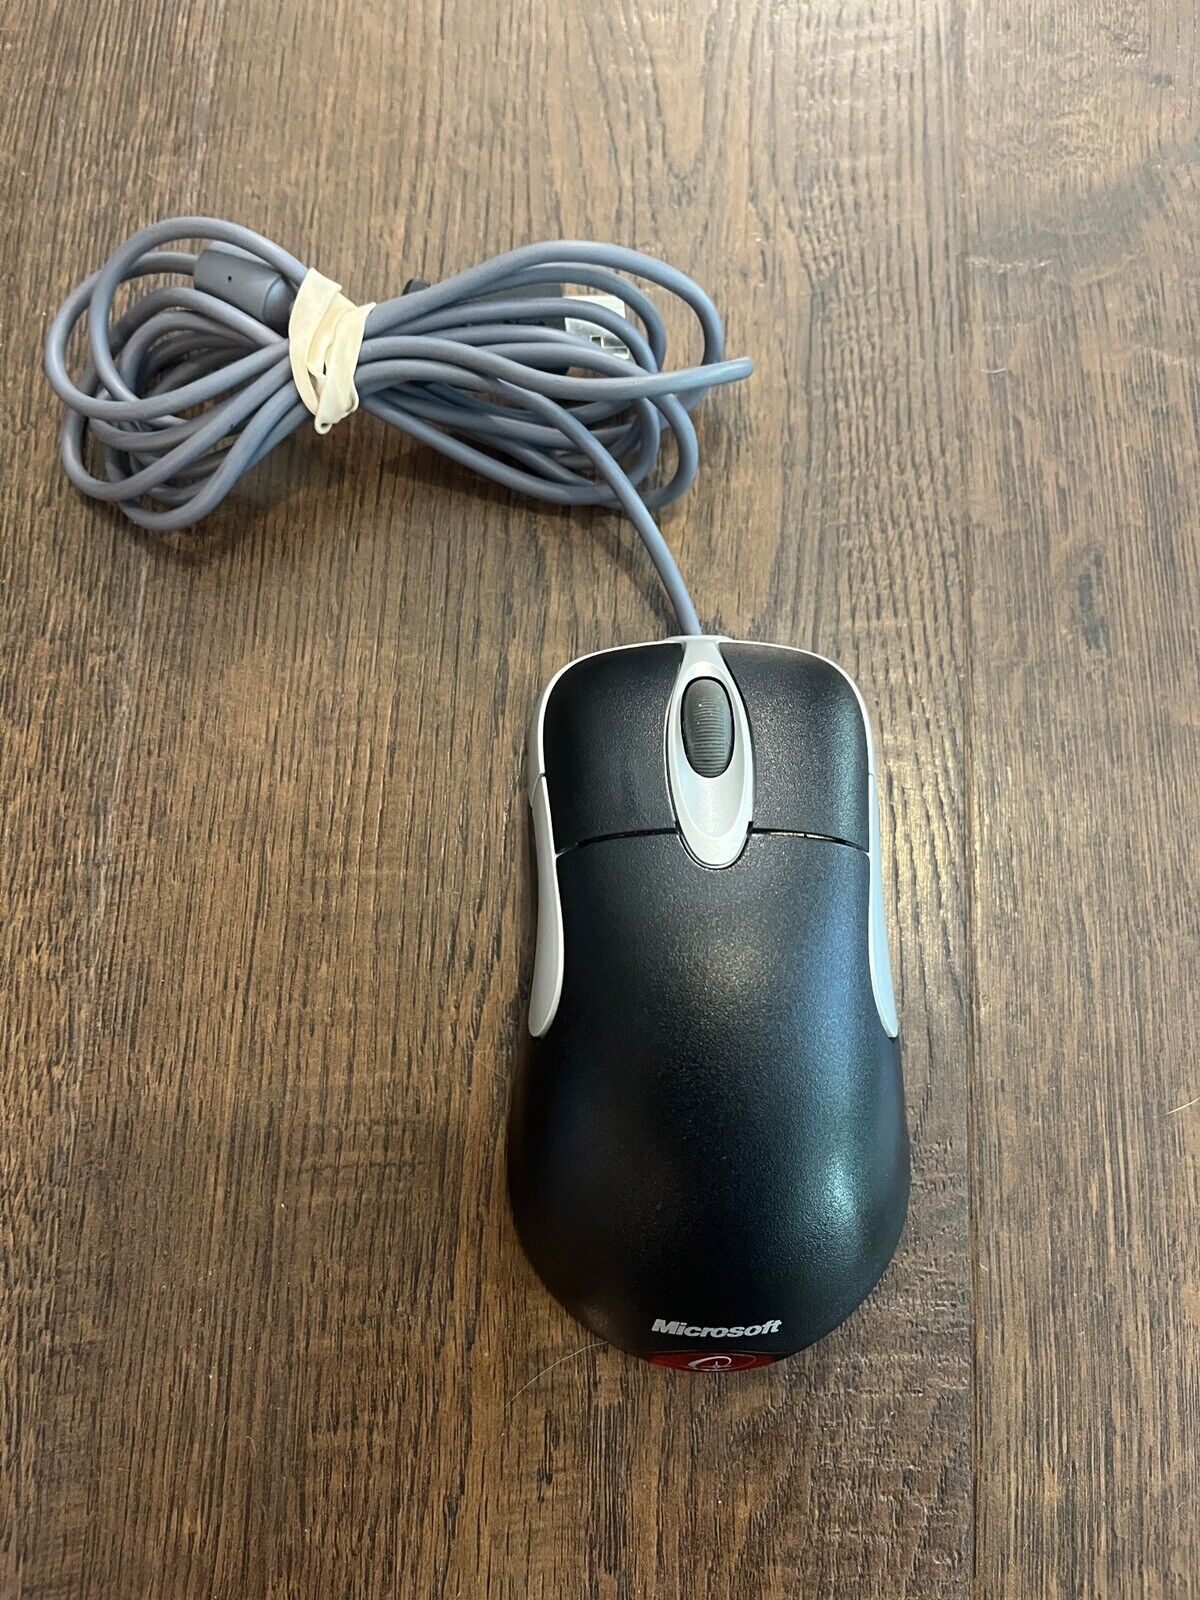 Vintage Black Microsoft intellimouse Optical USB Wheel Mouse 1.1/1.1a - EXC COND